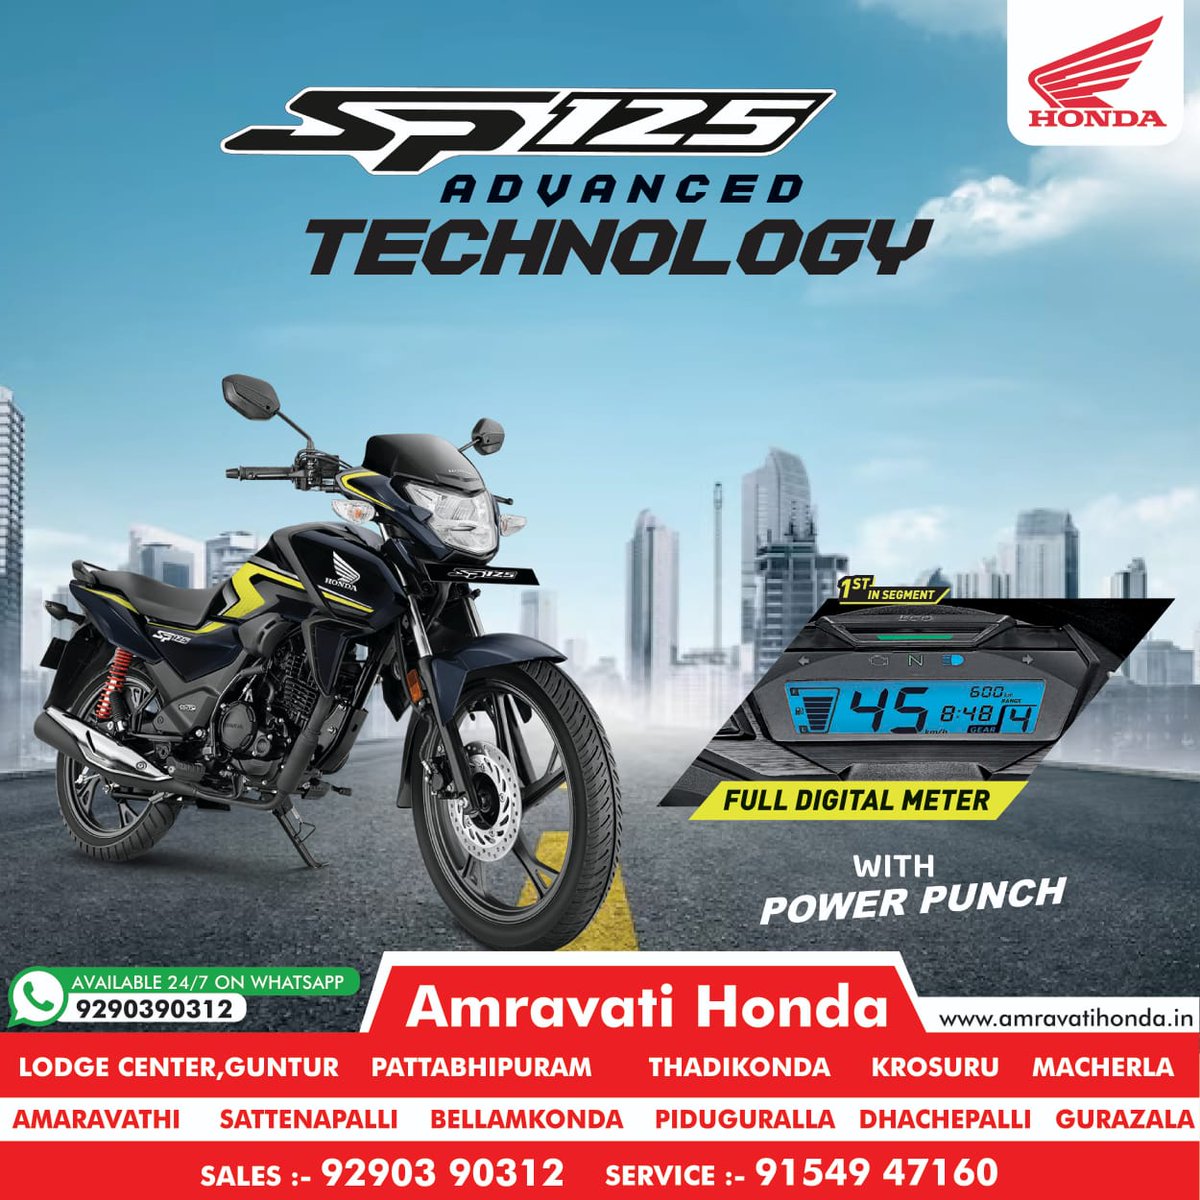 Advanced Technology!
Experience the Thrill of Superior Performance with #HondaSP125 - Full Digital Meter with a power punch.
Hurry, limited-time offer.
To know more please visit:
amravatihonda.in
Call us at 9290390312
#AmravatiHonda #HondaSP125 #LowDownPayment
#HondaIndia